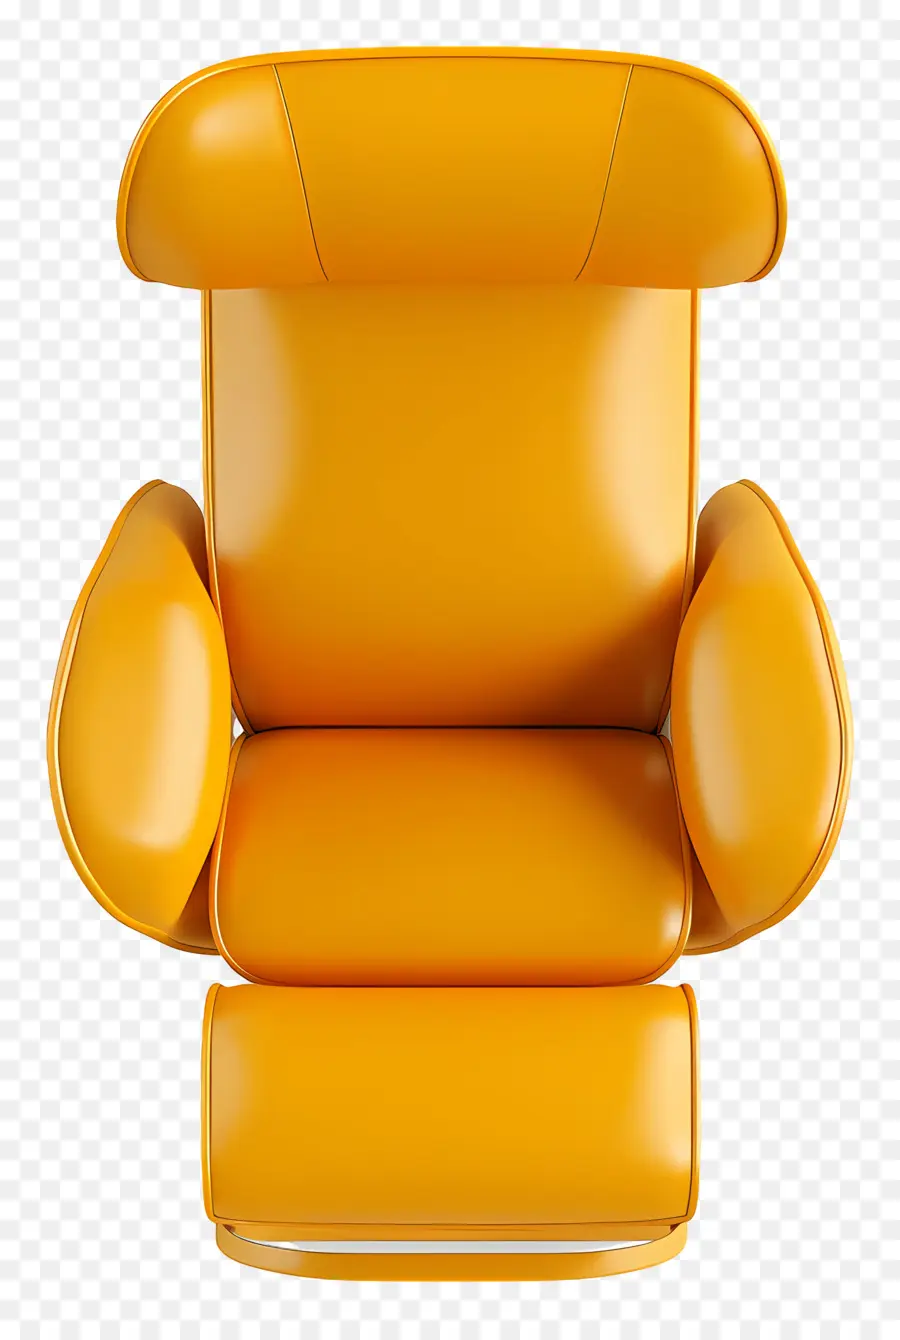 Chaise Vue De Dessus，Chaise Inclinable Jaune PNG